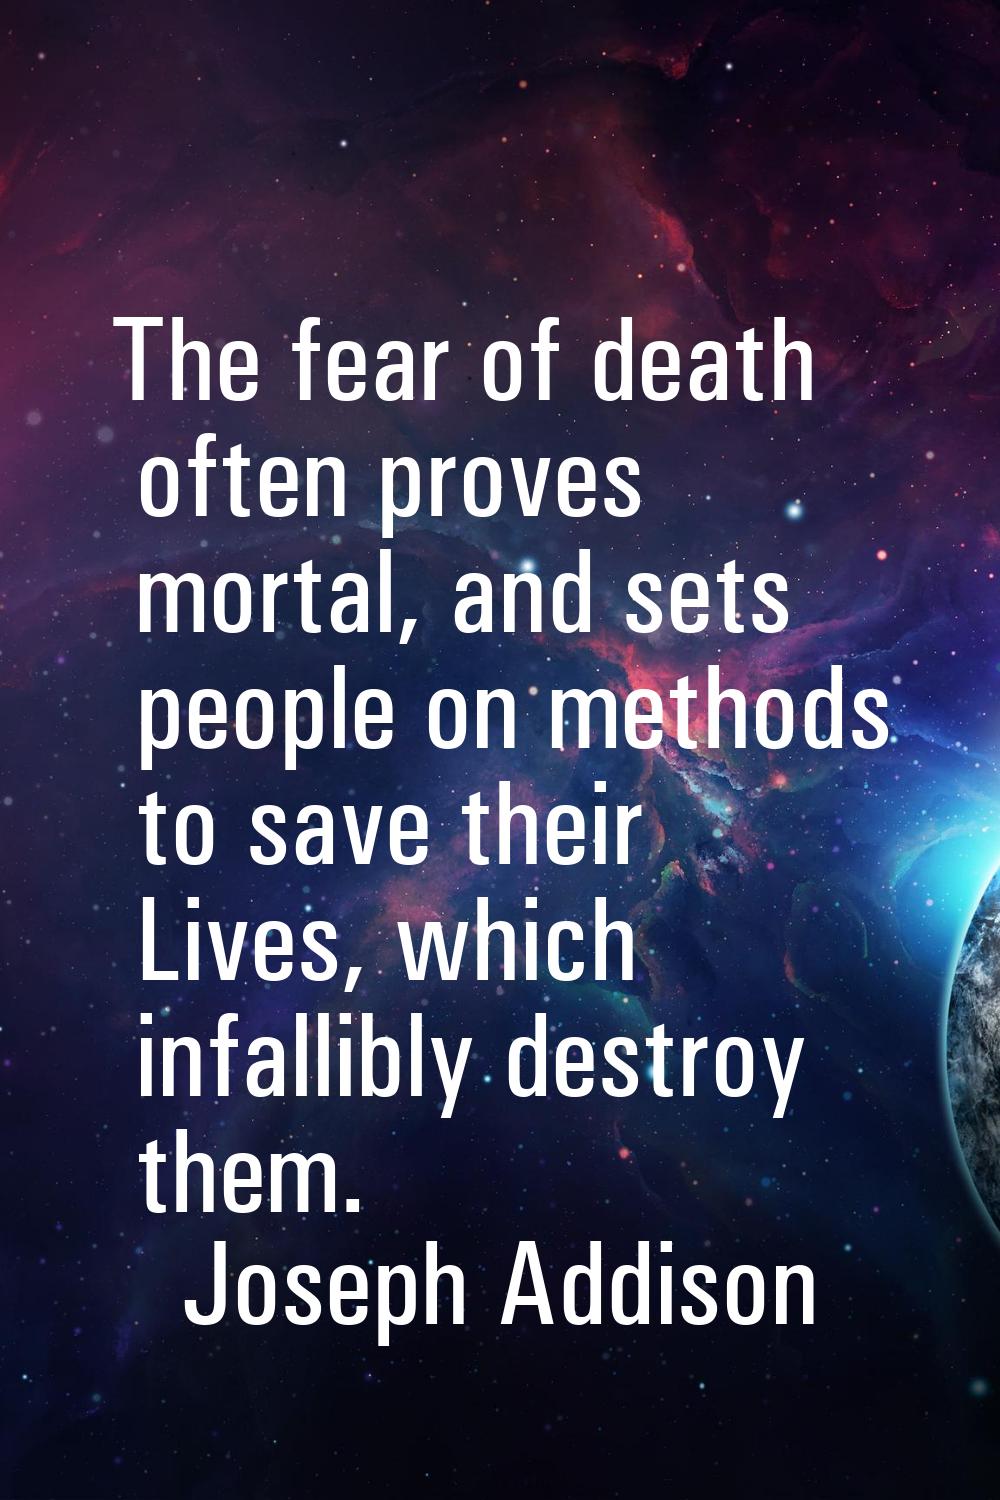 The fear of death often proves mortal, and sets people on methods to save their Lives, which infall